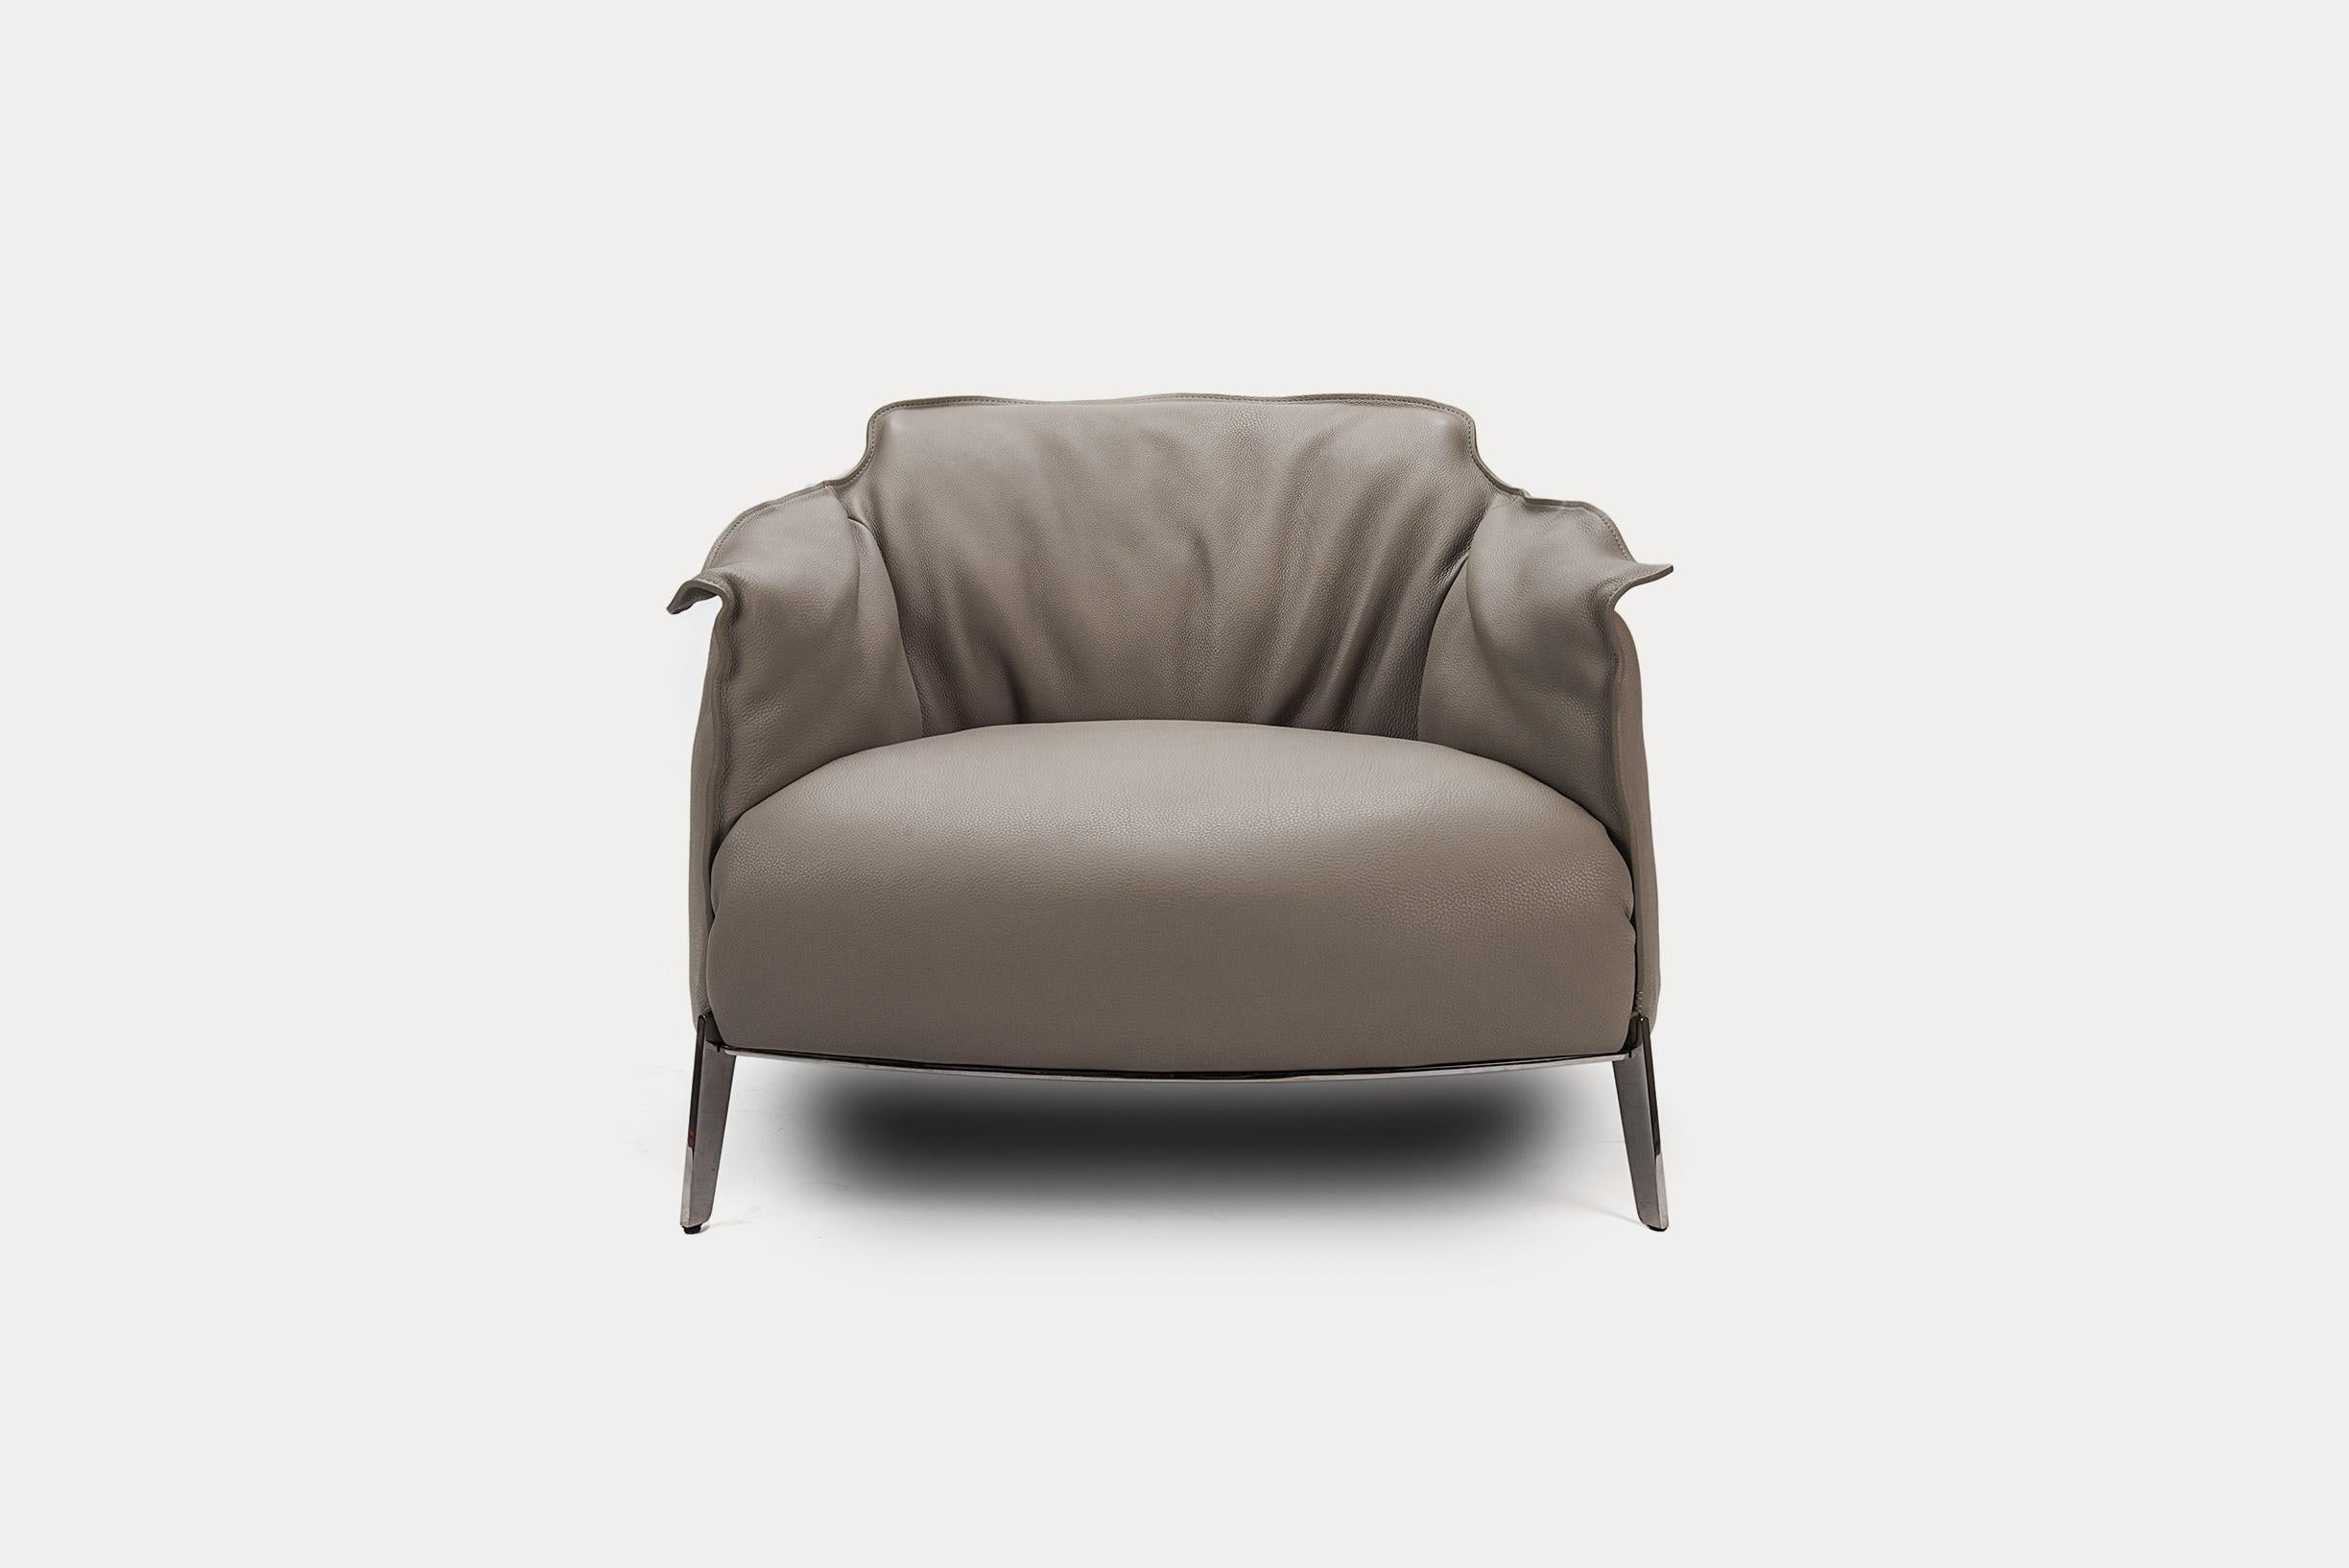 This set consists of one chair and the ottoman. Gran Comfort is the most generous chair of the Archibald series. Both chair and ottoman are upholstered in warm grey Safari leather. The stitching details, contrast between smooth and gathered leather,